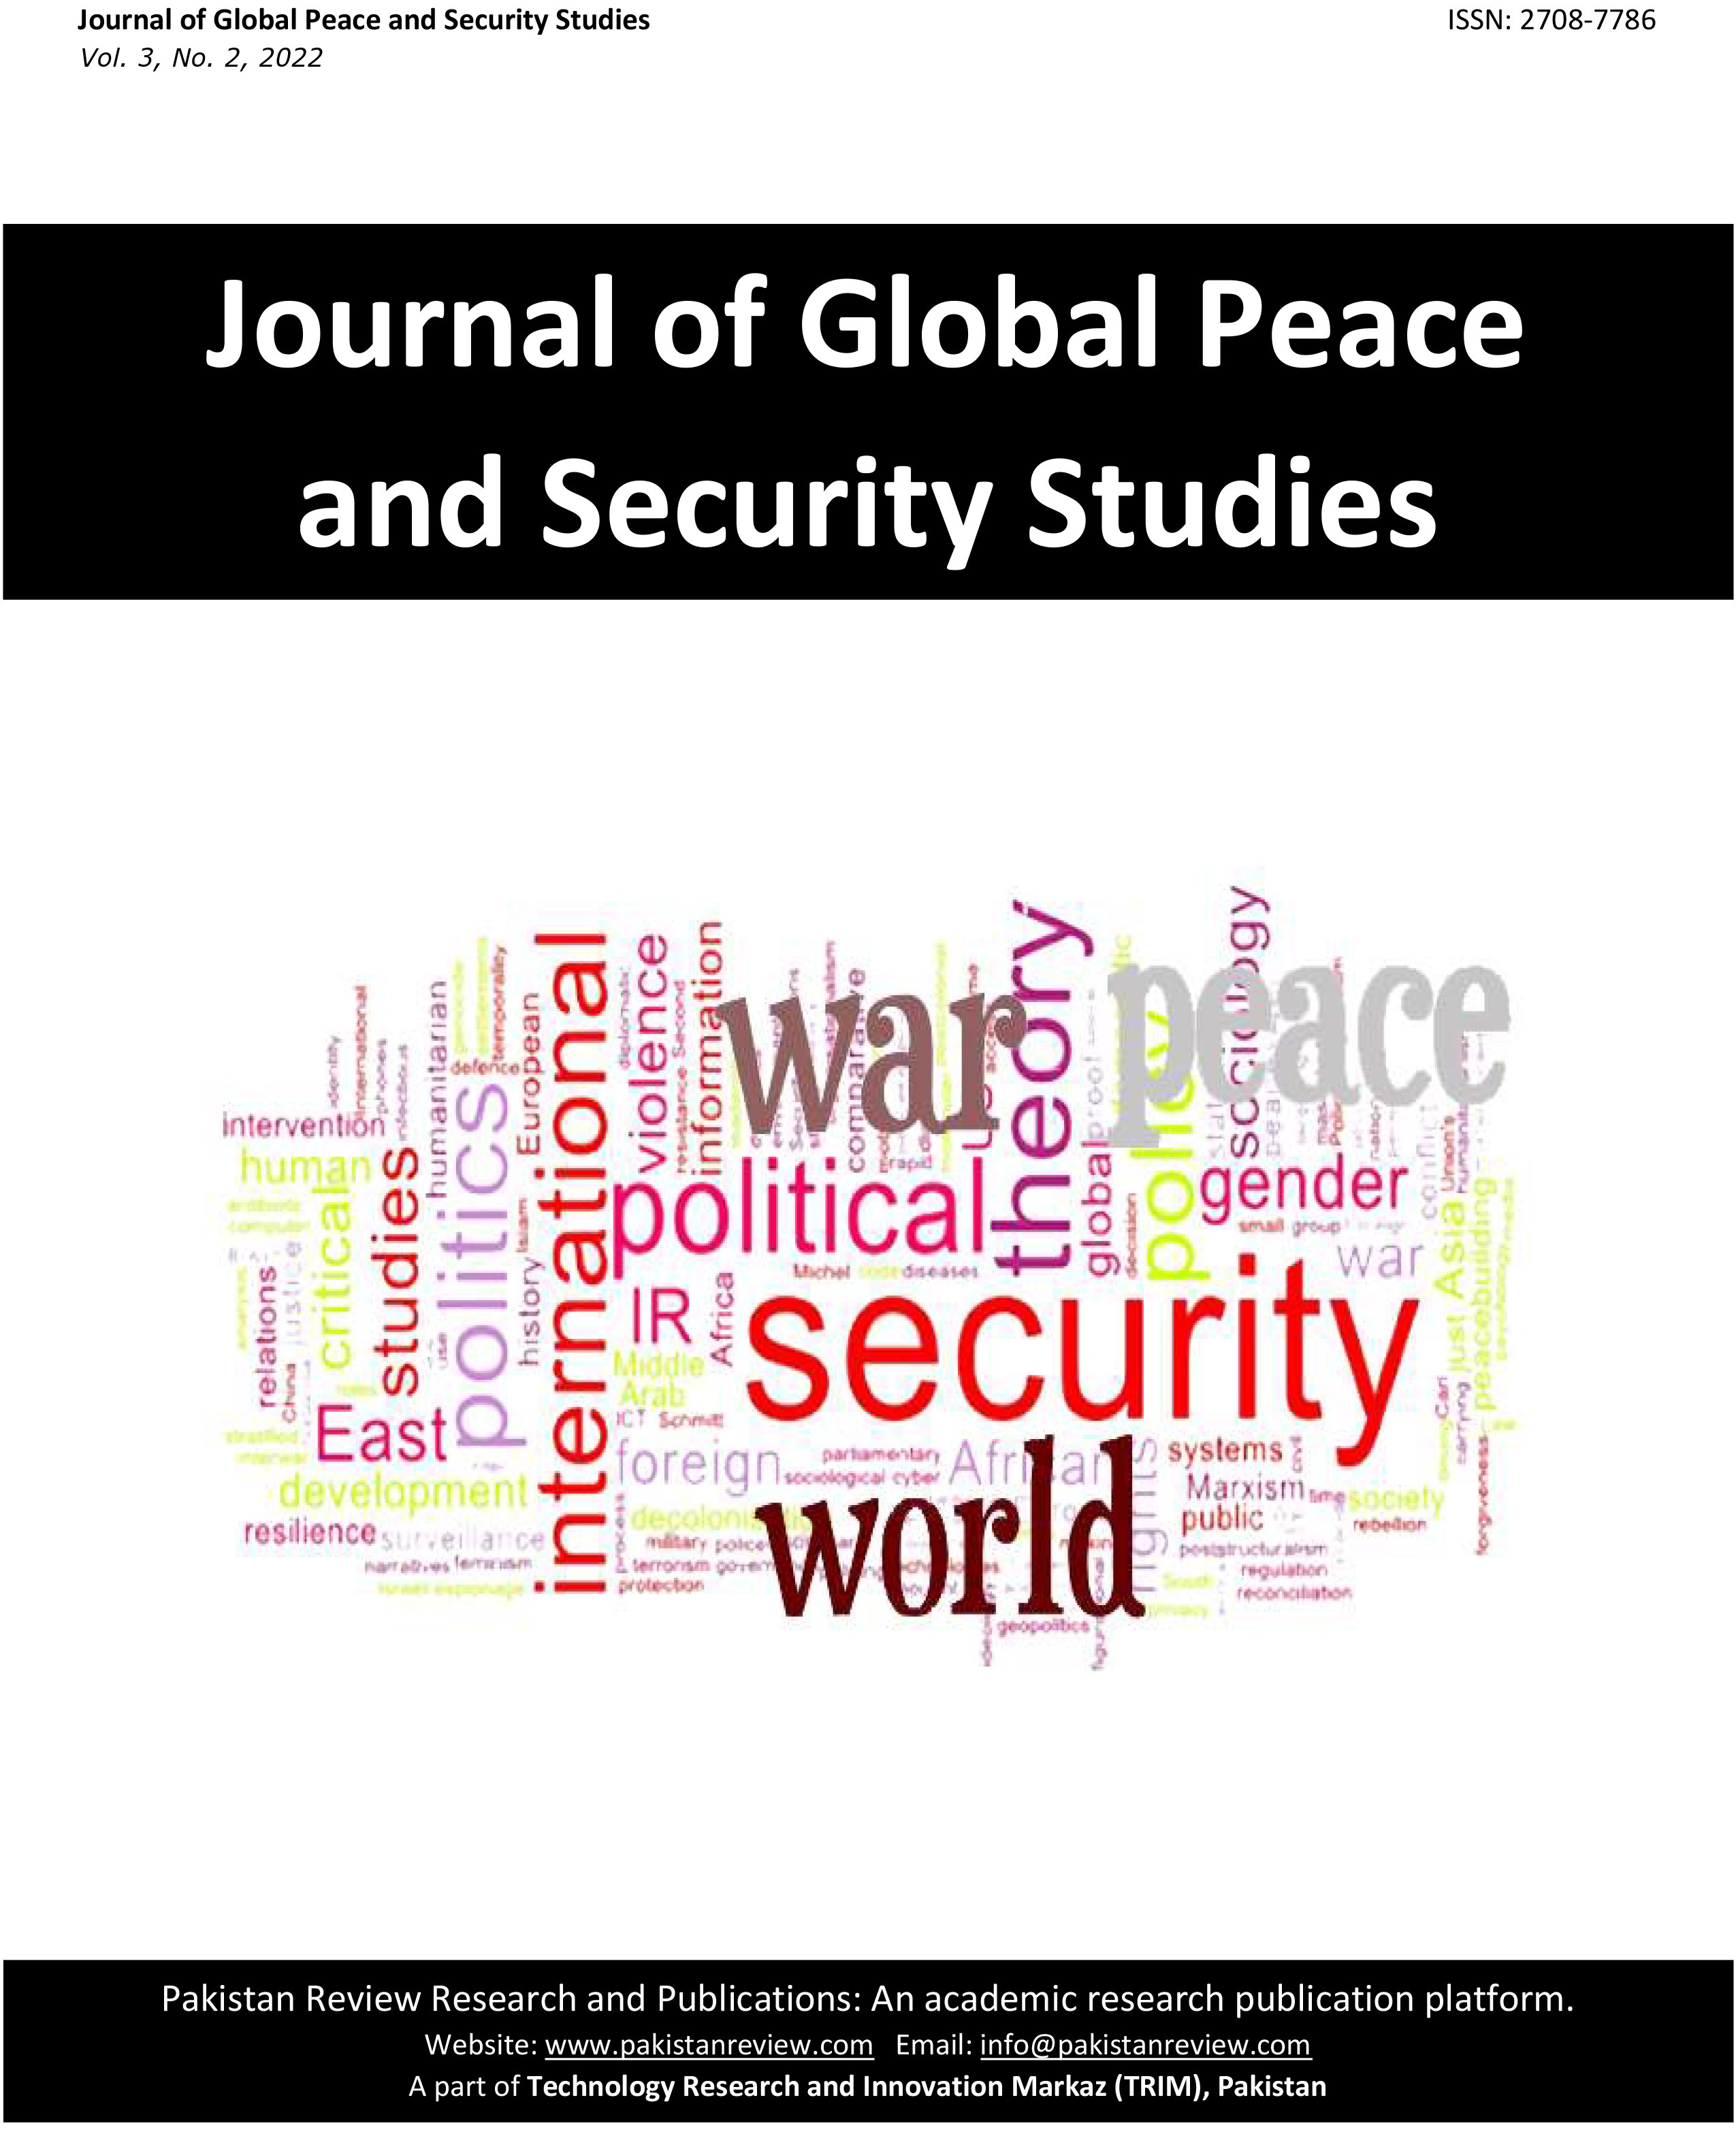 					View Vol. 3 No. 2 (2022): Journal of Global Peace and Security Studies (JGPSS)
				